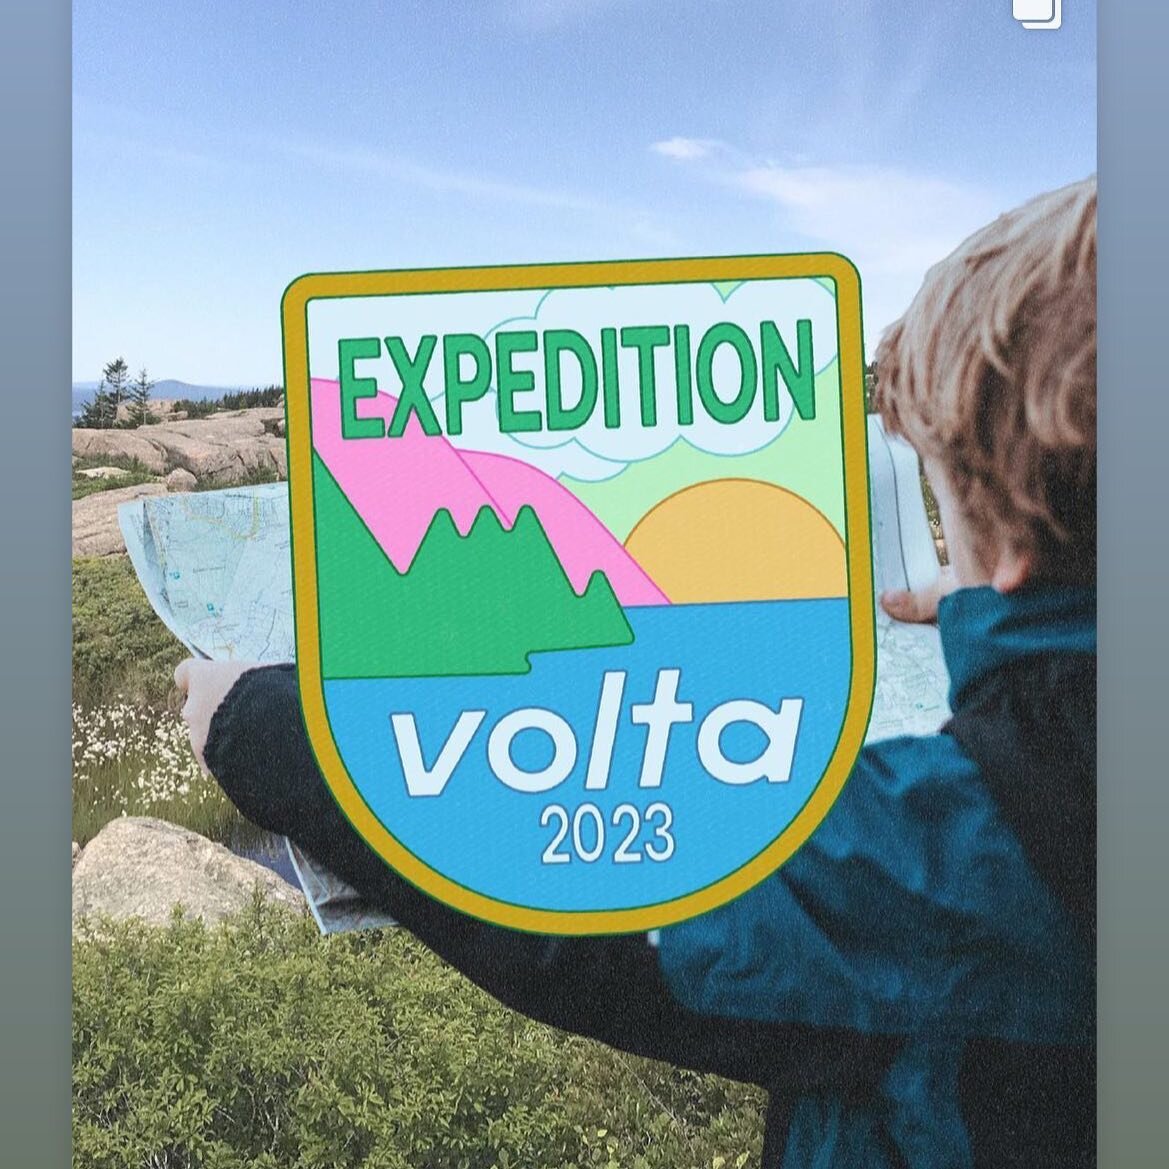 Super excited to team up with @voltaclimbing for some summer time adventure camps! Head on over to https://voltaclimbing.com/ to sign up